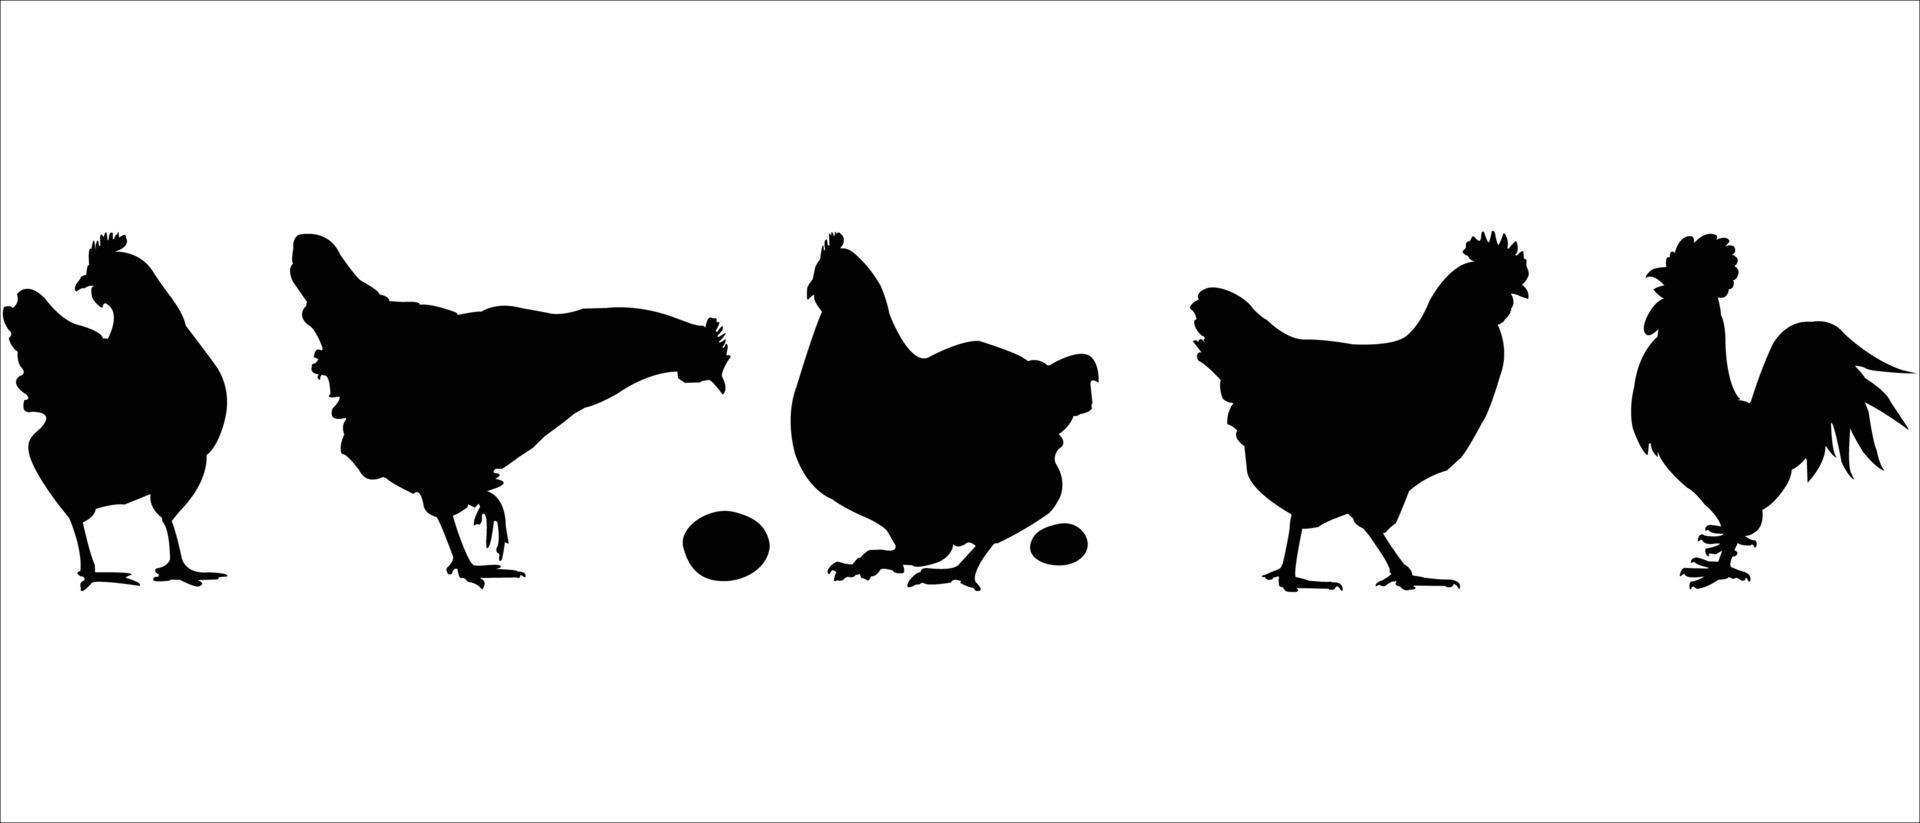 Hen silhouette collection vector